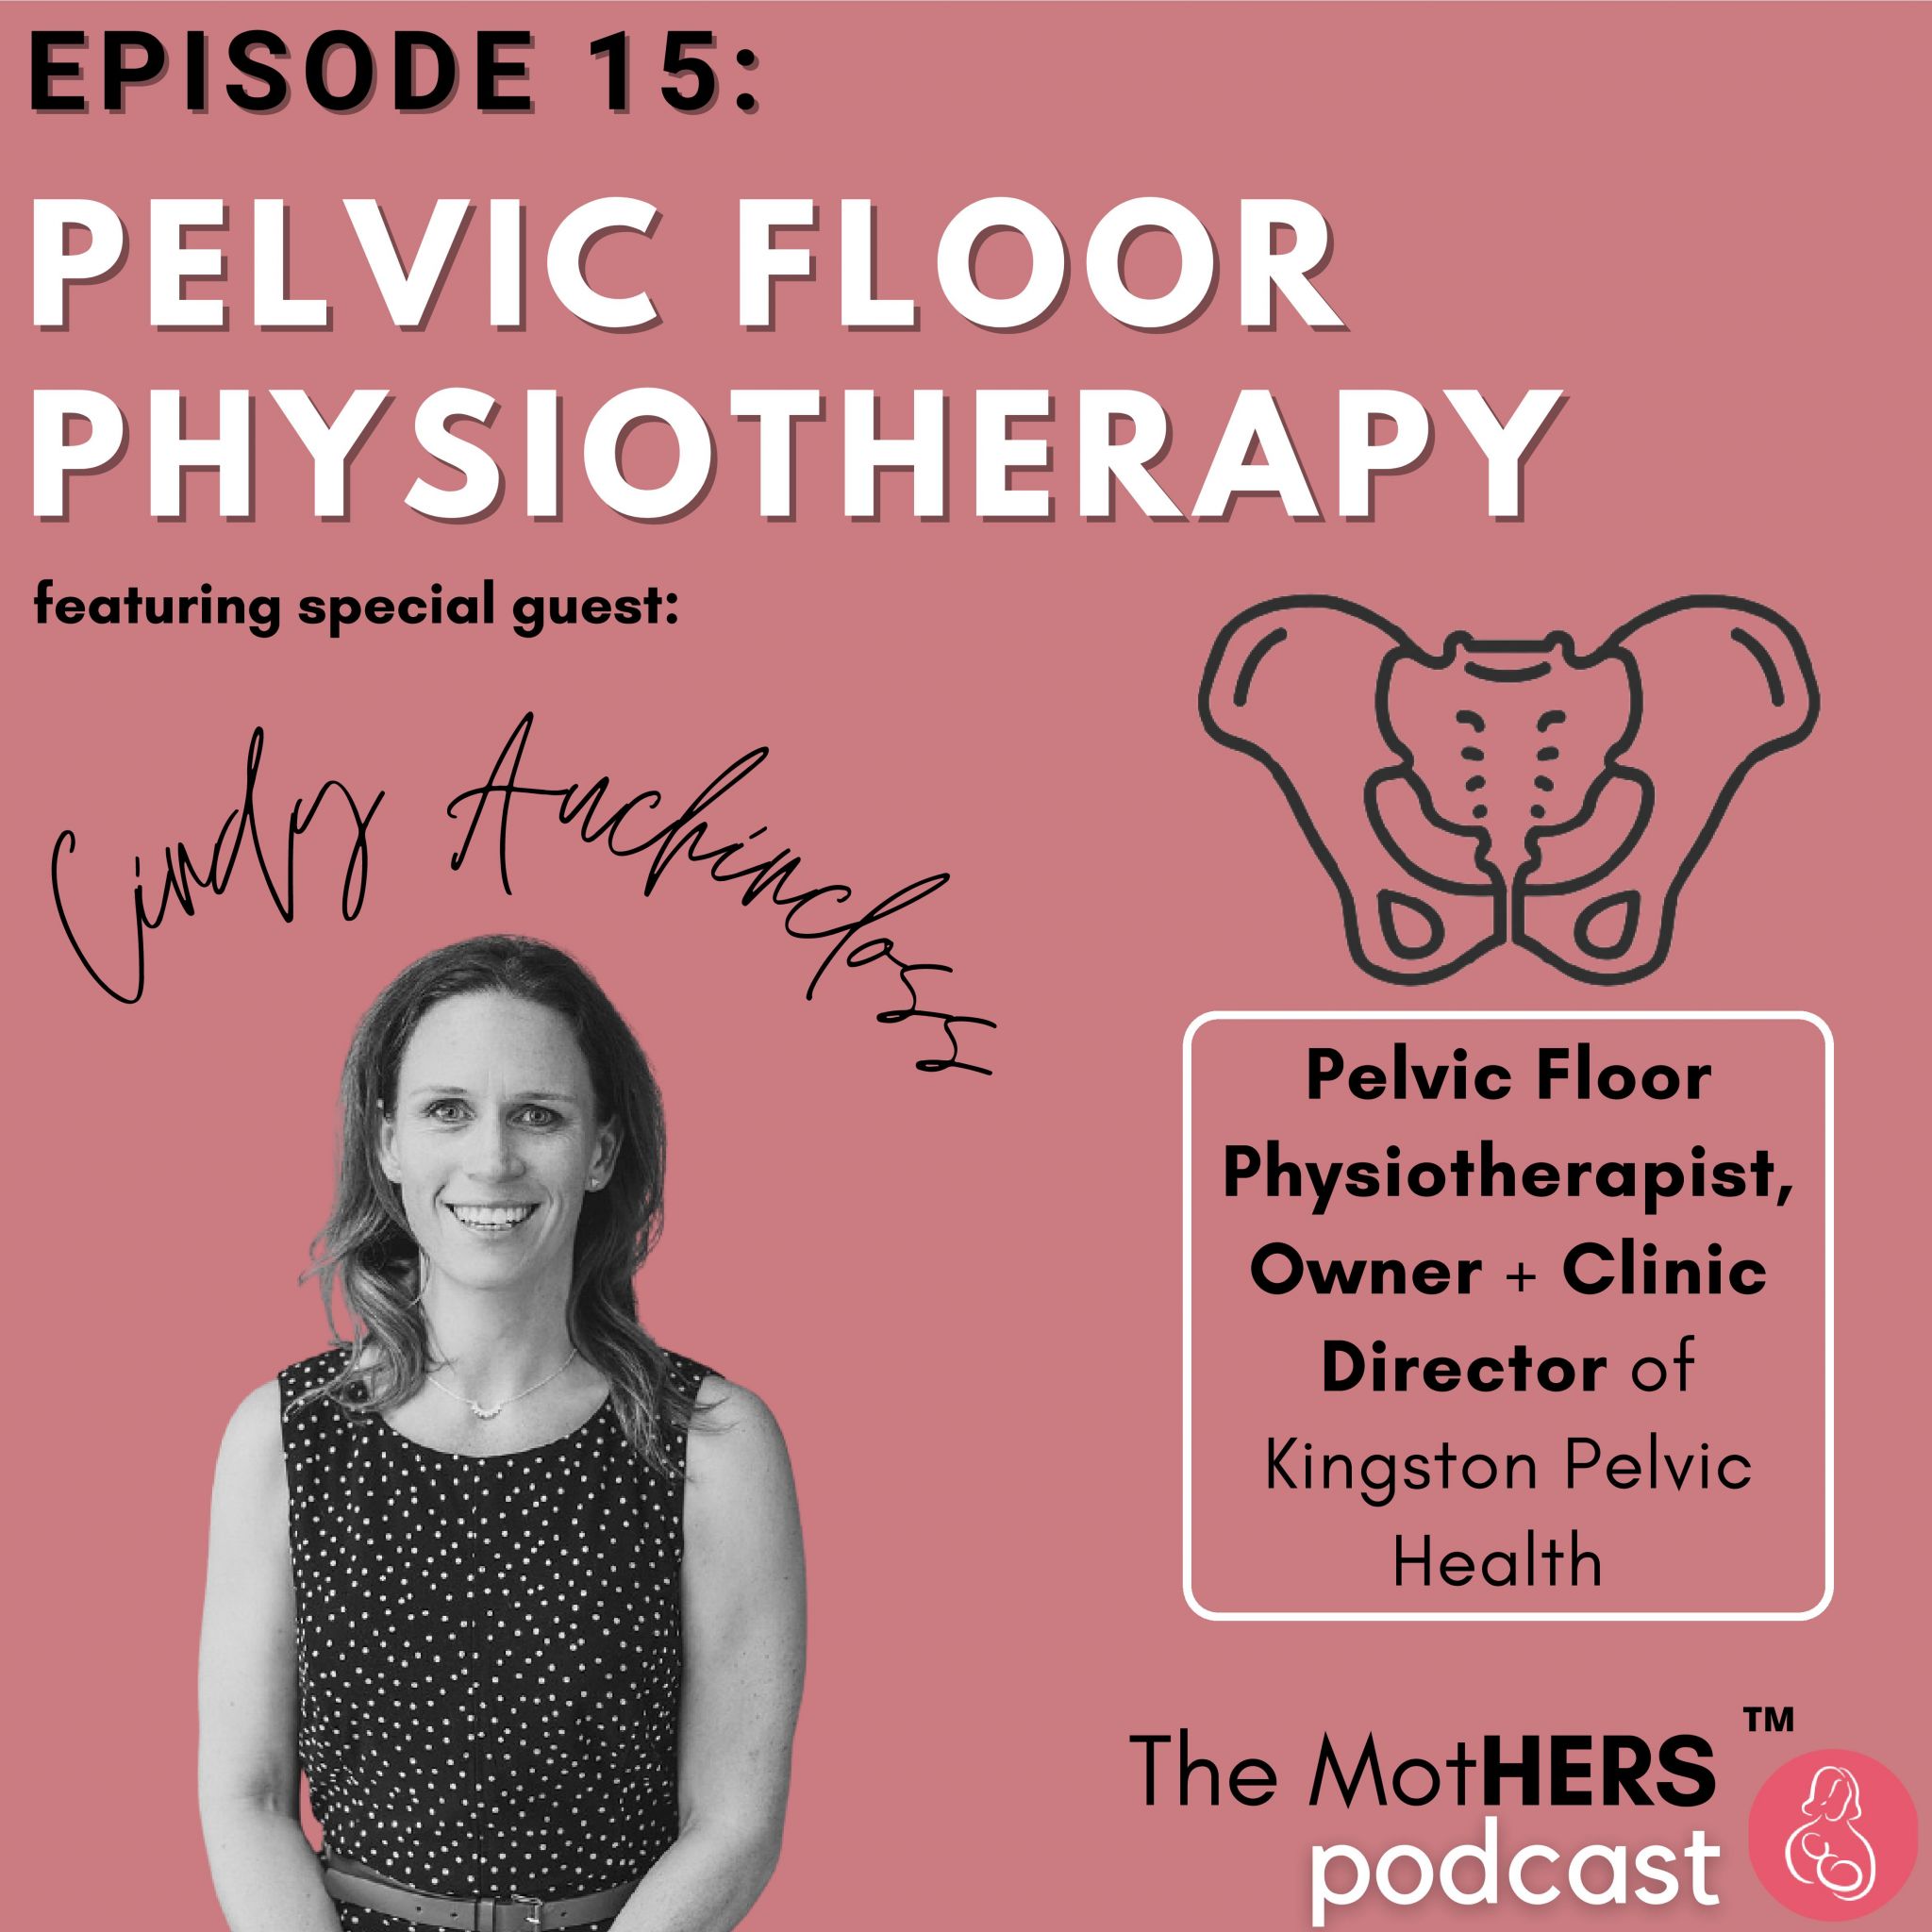 Episode 15 - Pelvic Floor Physiotherapy